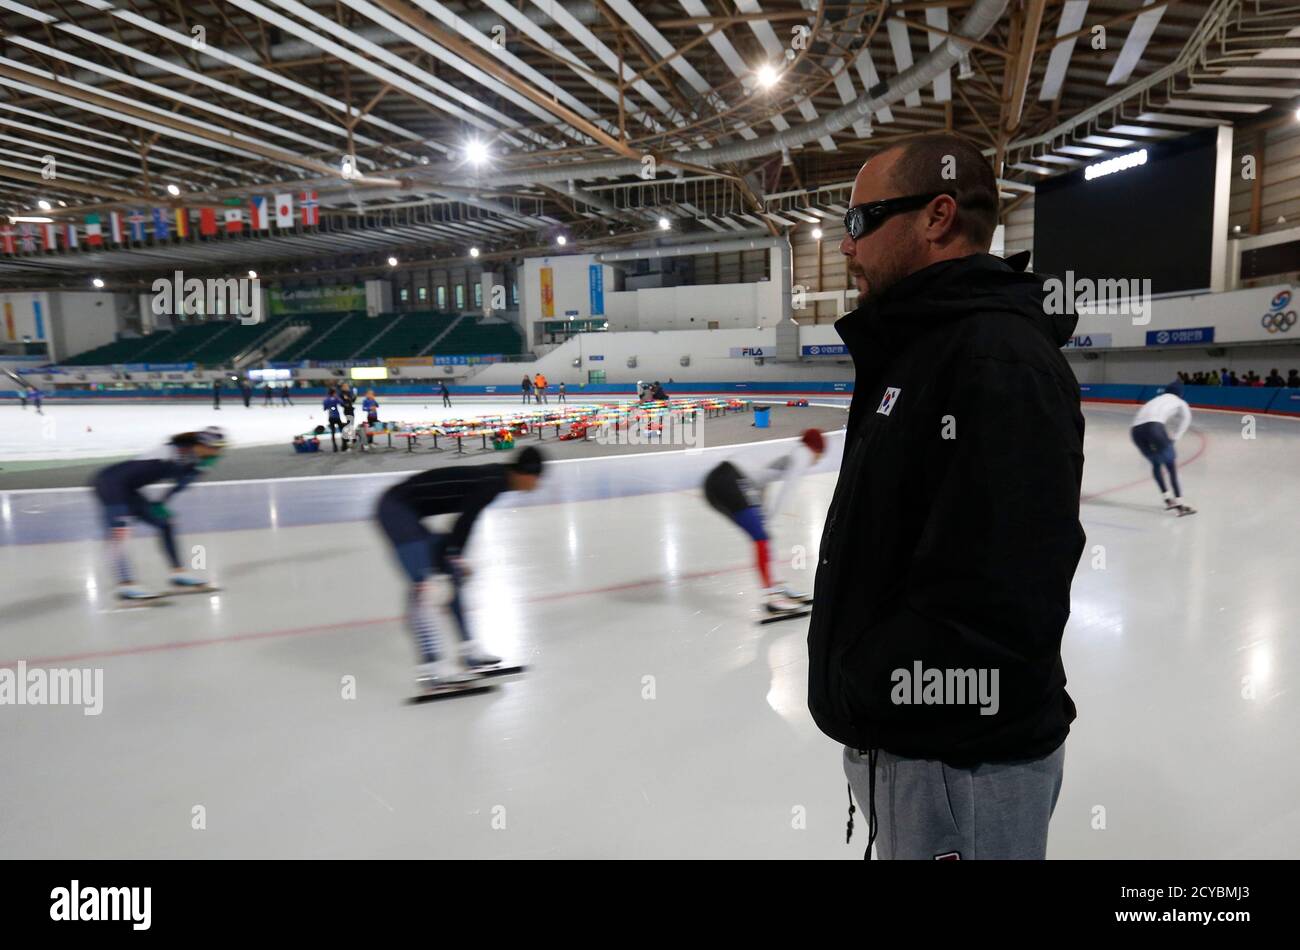 South Korea's speed skating coach Kevin Crockett takes part in a training  session at Taereung National Training Center in Seoul October 30, 2013.  South Korea's rise to the top of the speed